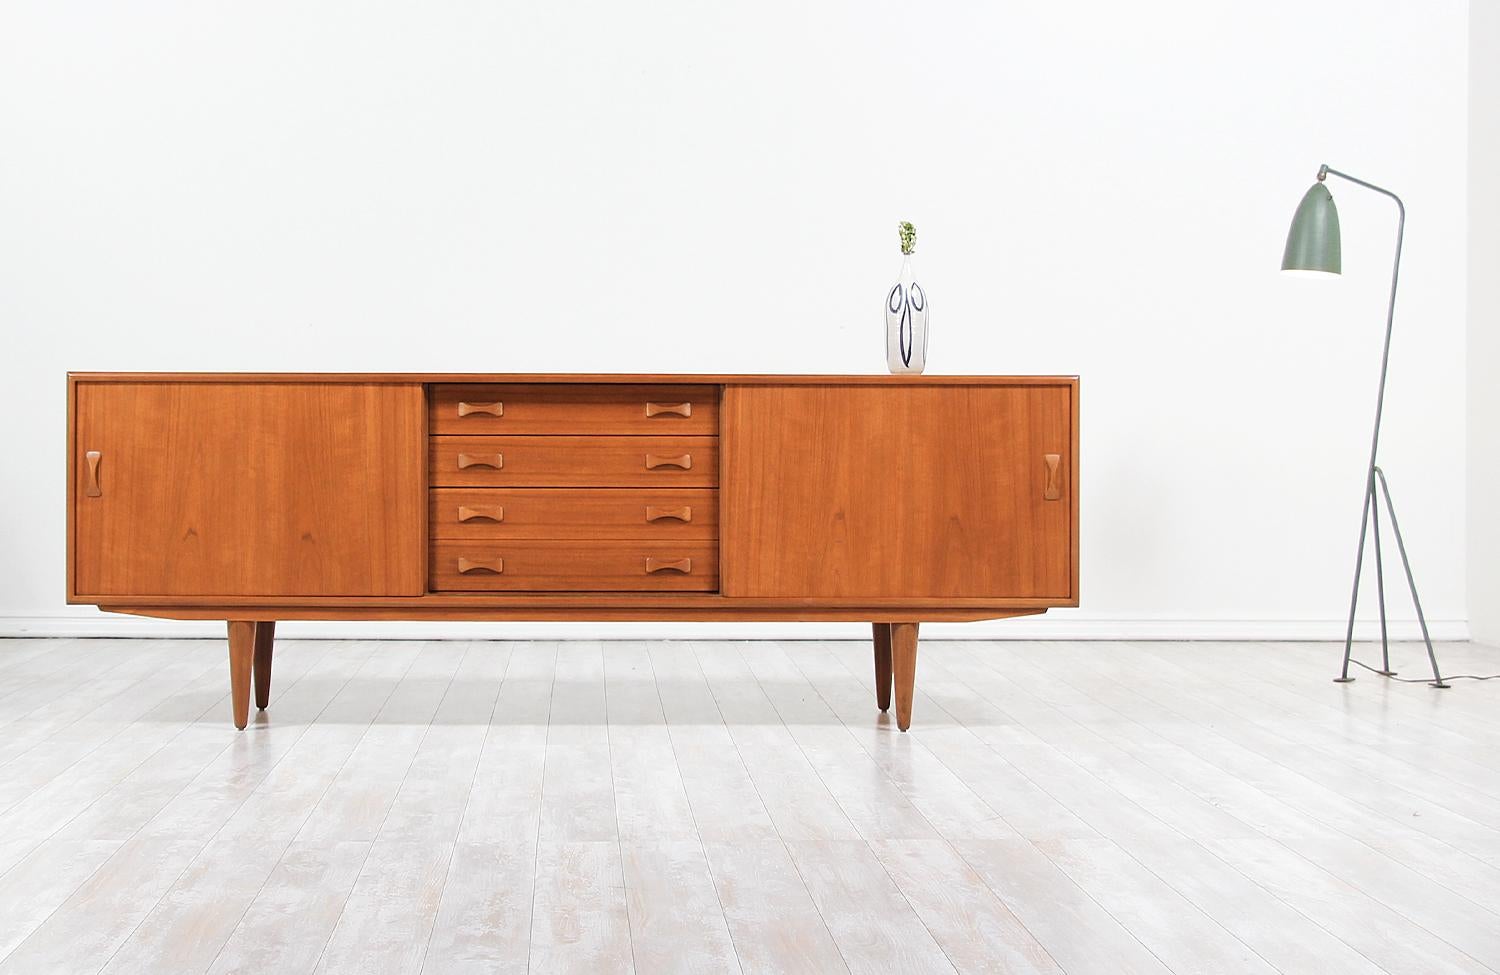 Mid-Century Modern credenza designed and manufactured by Clausen & Søn in Denmark, circa 1960s. This beautiful credenza features a sturdy teak construction over four tapered legs and a beautiful teak grain, adding a warm accent to this stylish